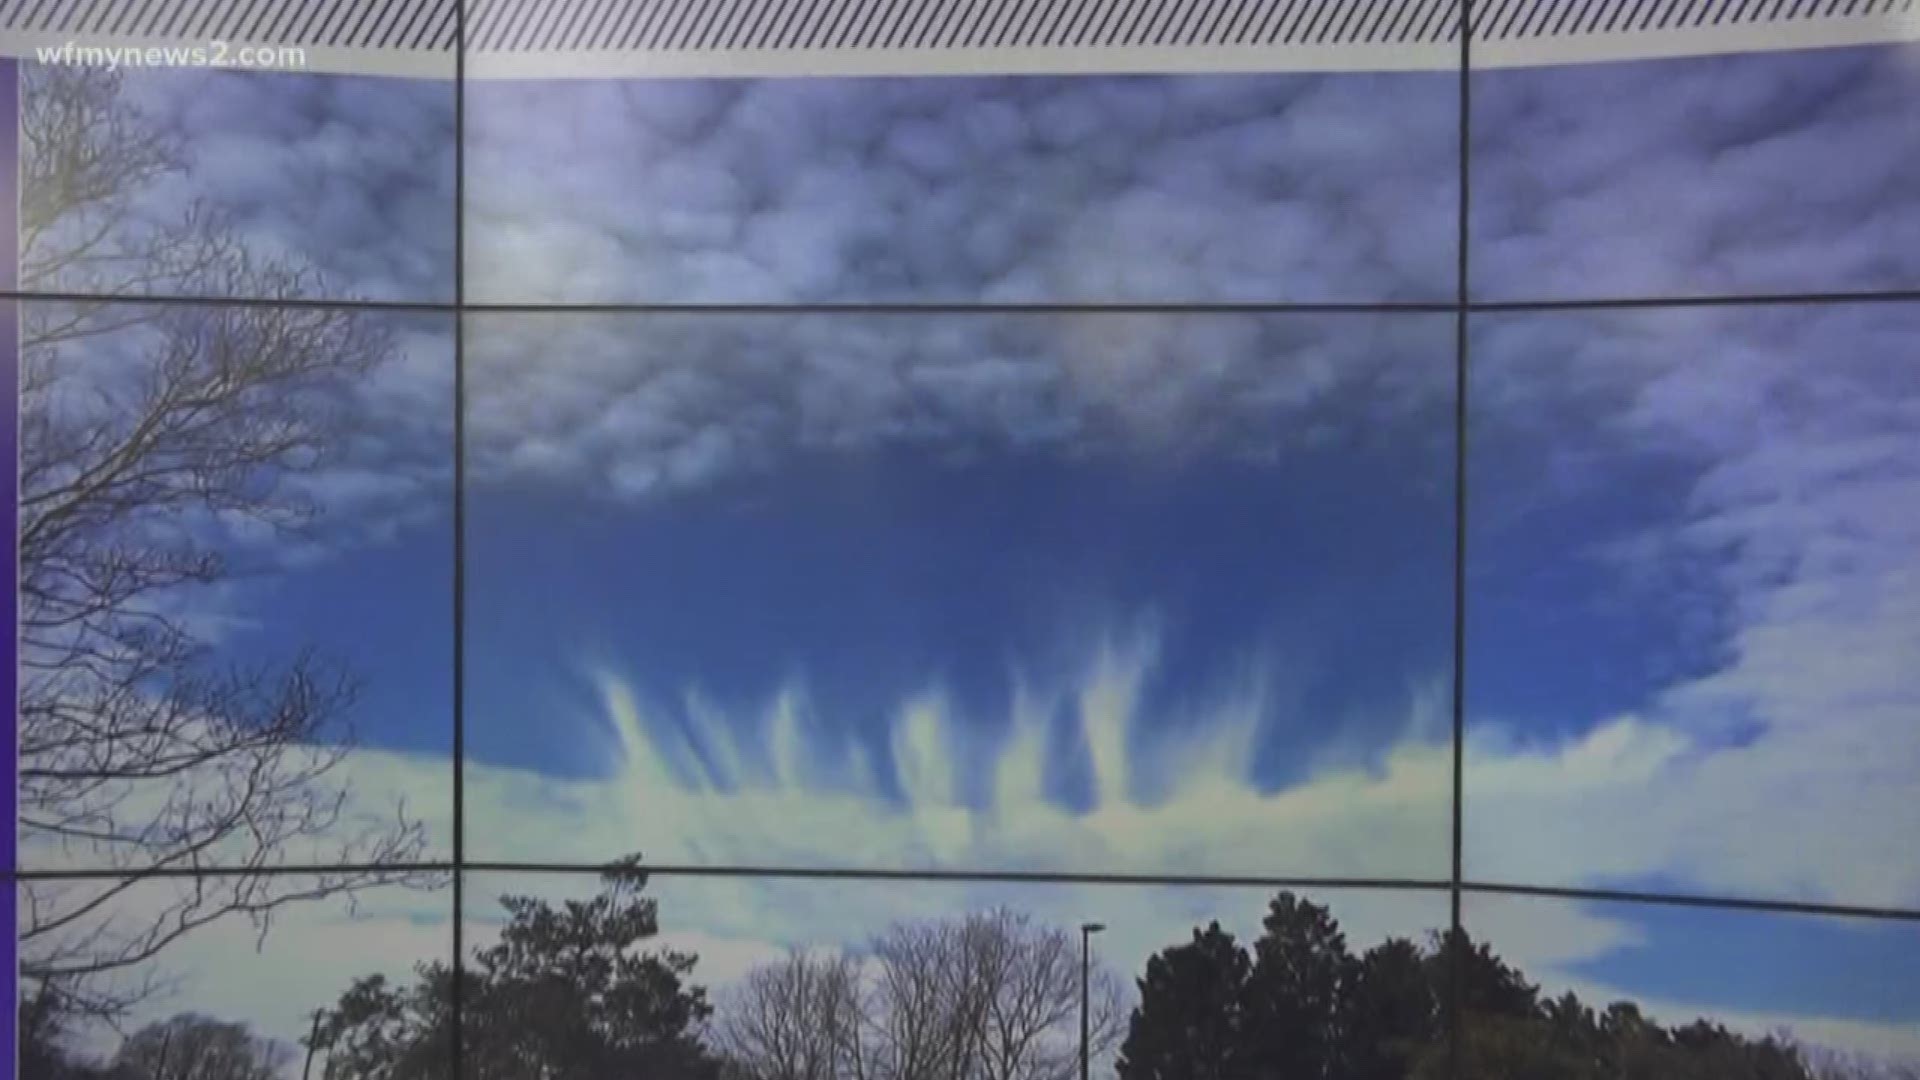 WFMY News 2's Chrisitan Morgan breaks down hole-punch clouds.